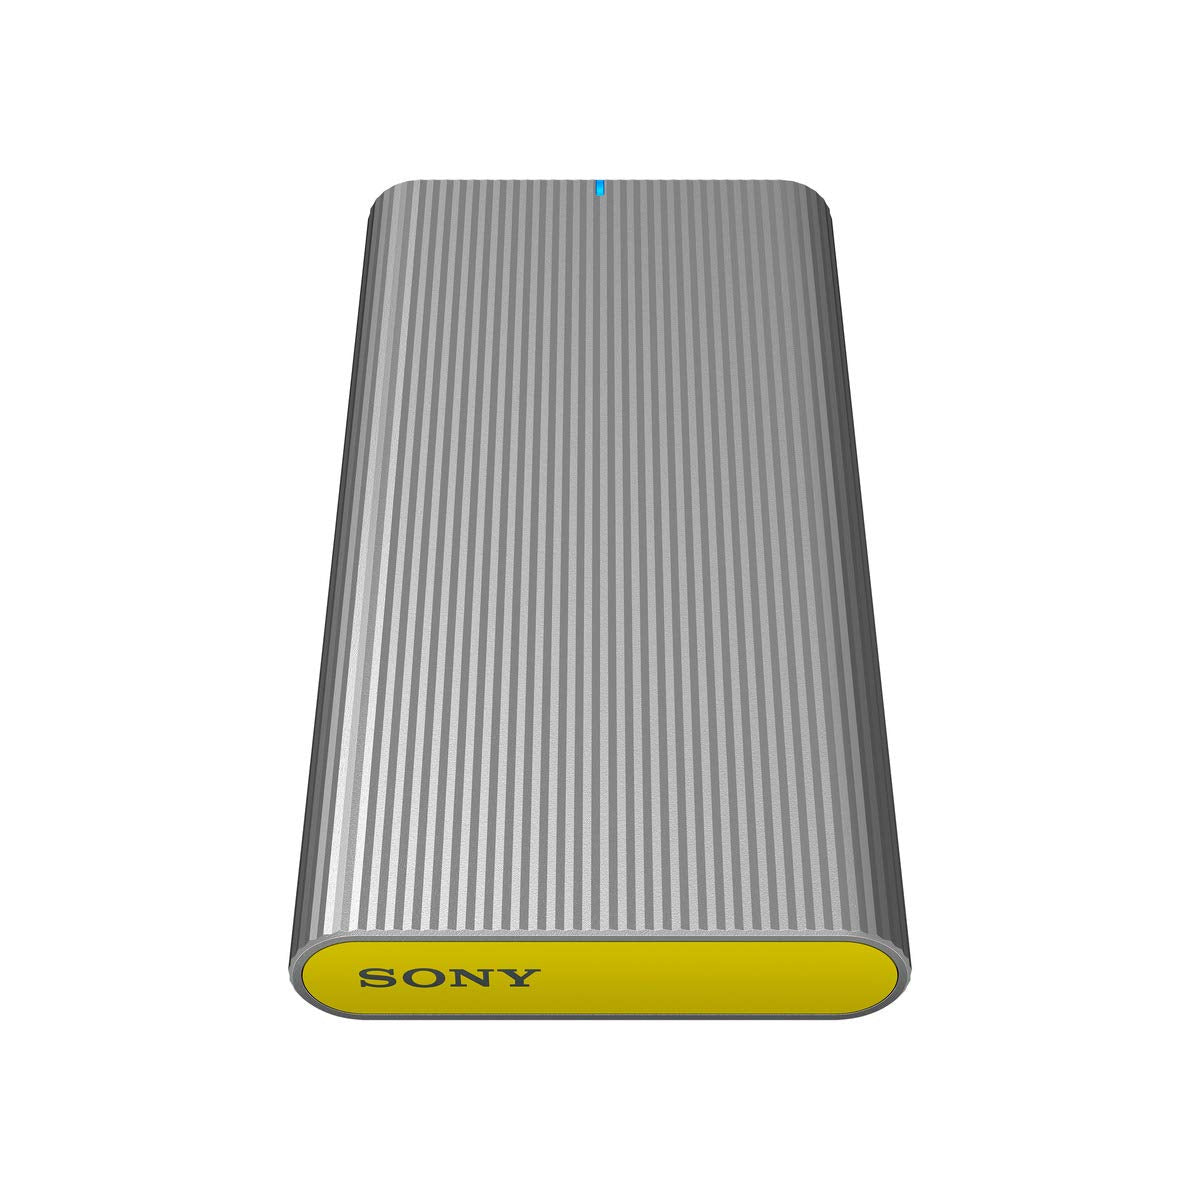 Sony External SSD Fast and Tough 500GB 1GB/s